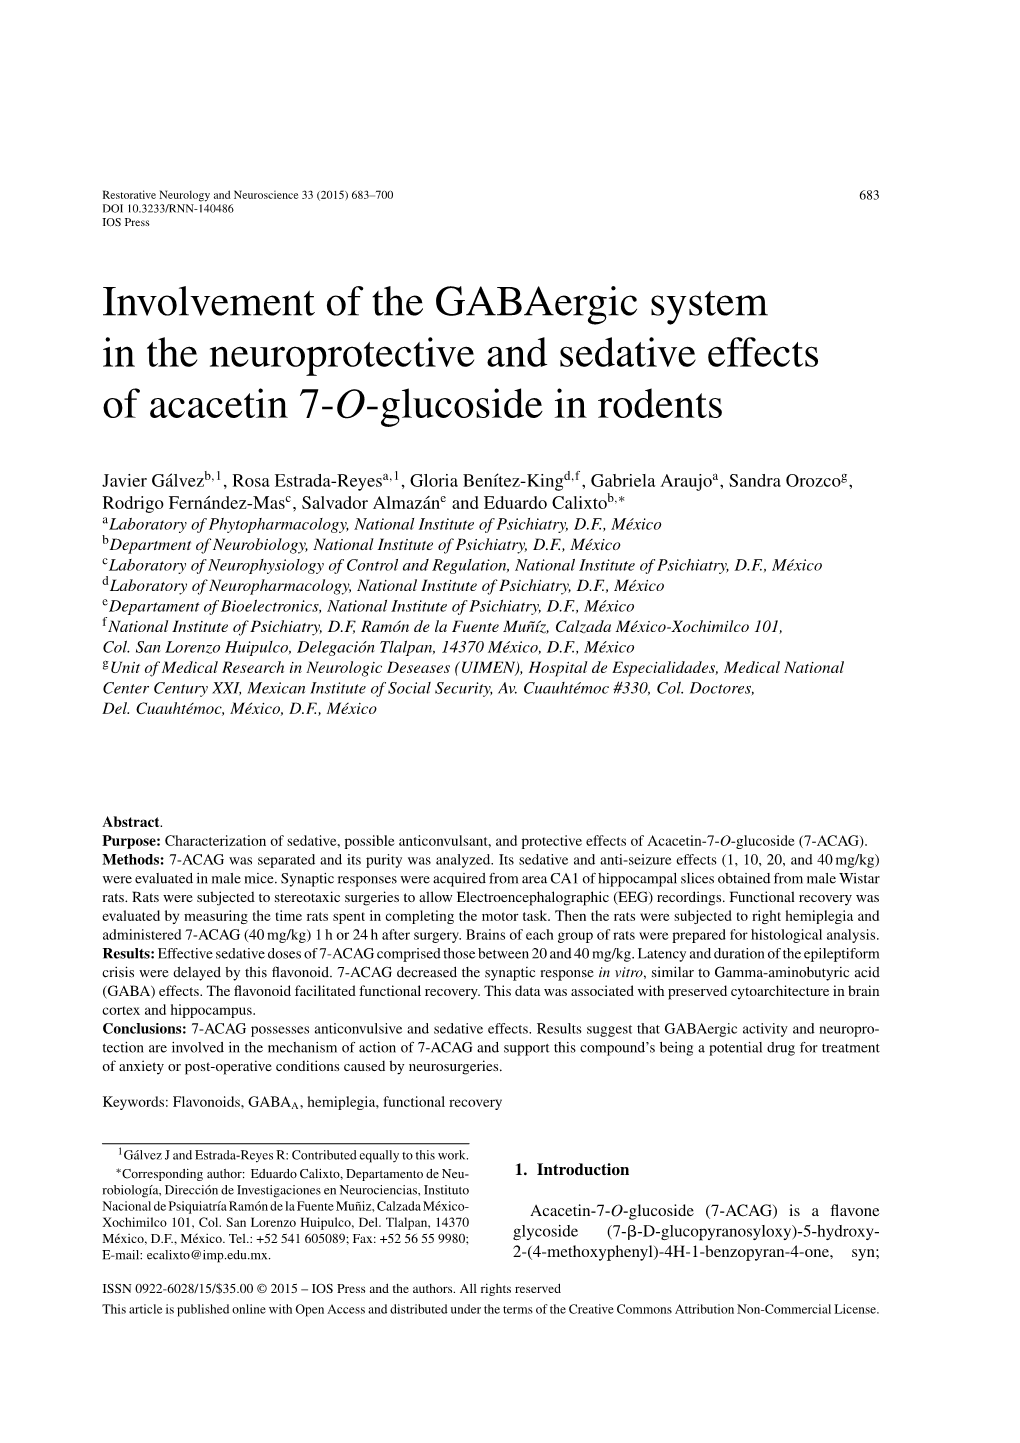 Involvement of the Gabaergic System in the Neuroprotective and Sedative Effects of Acacetin 7-O-Glucoside in Rodents